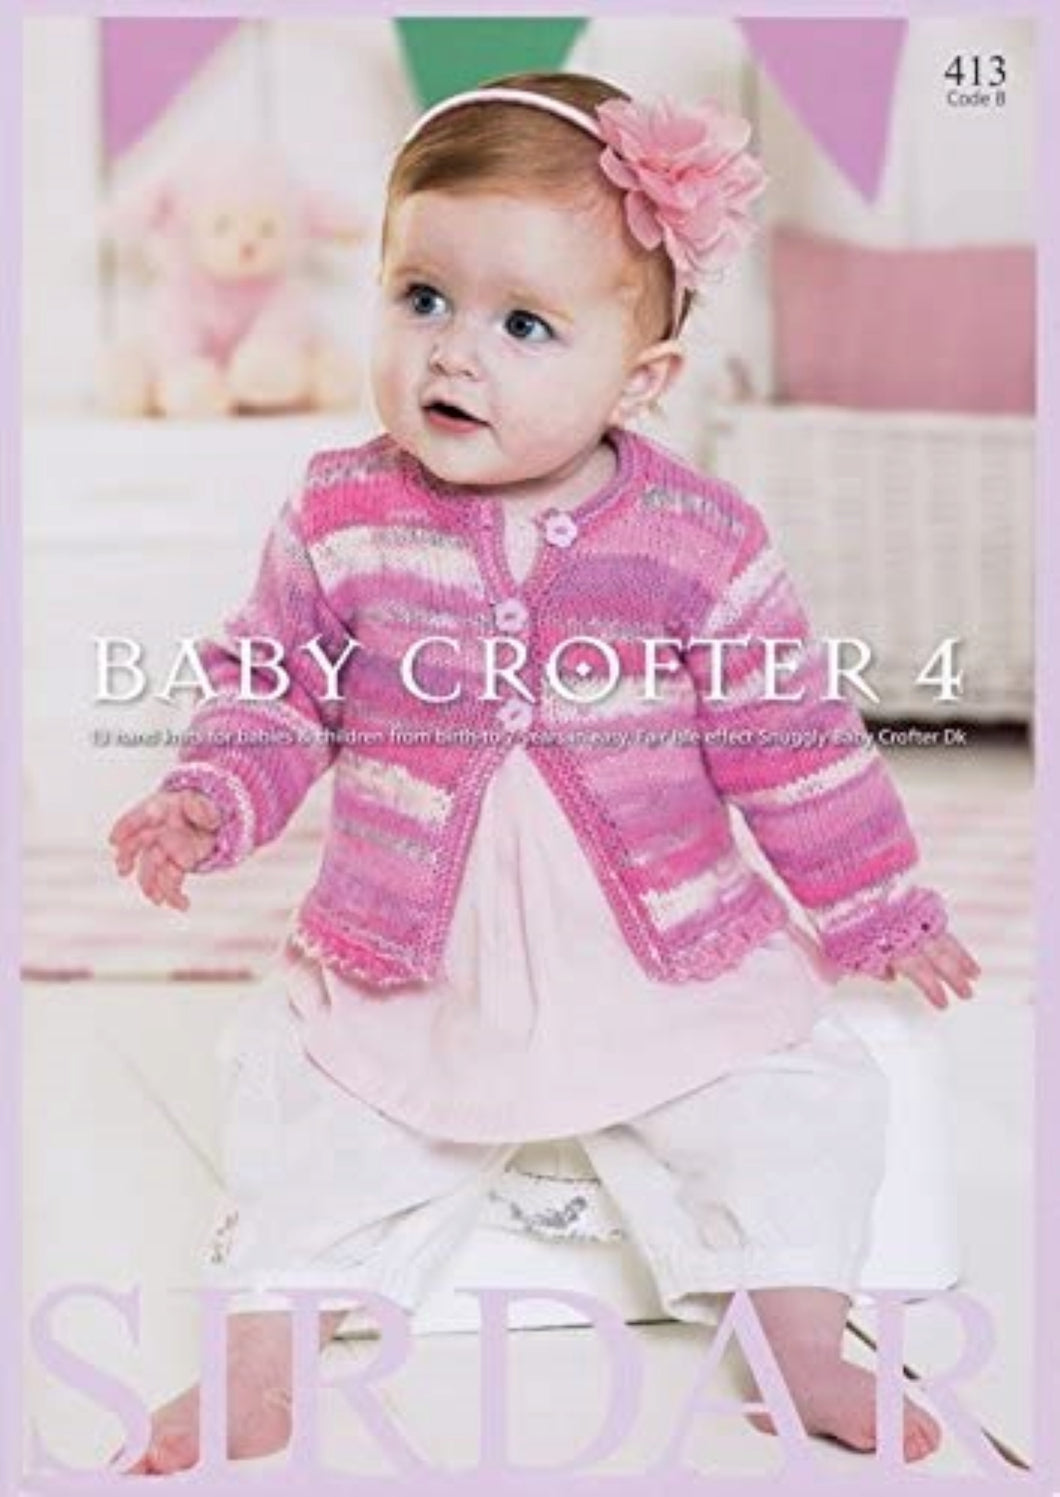 #413 - Baby Crofter 4 Booklet